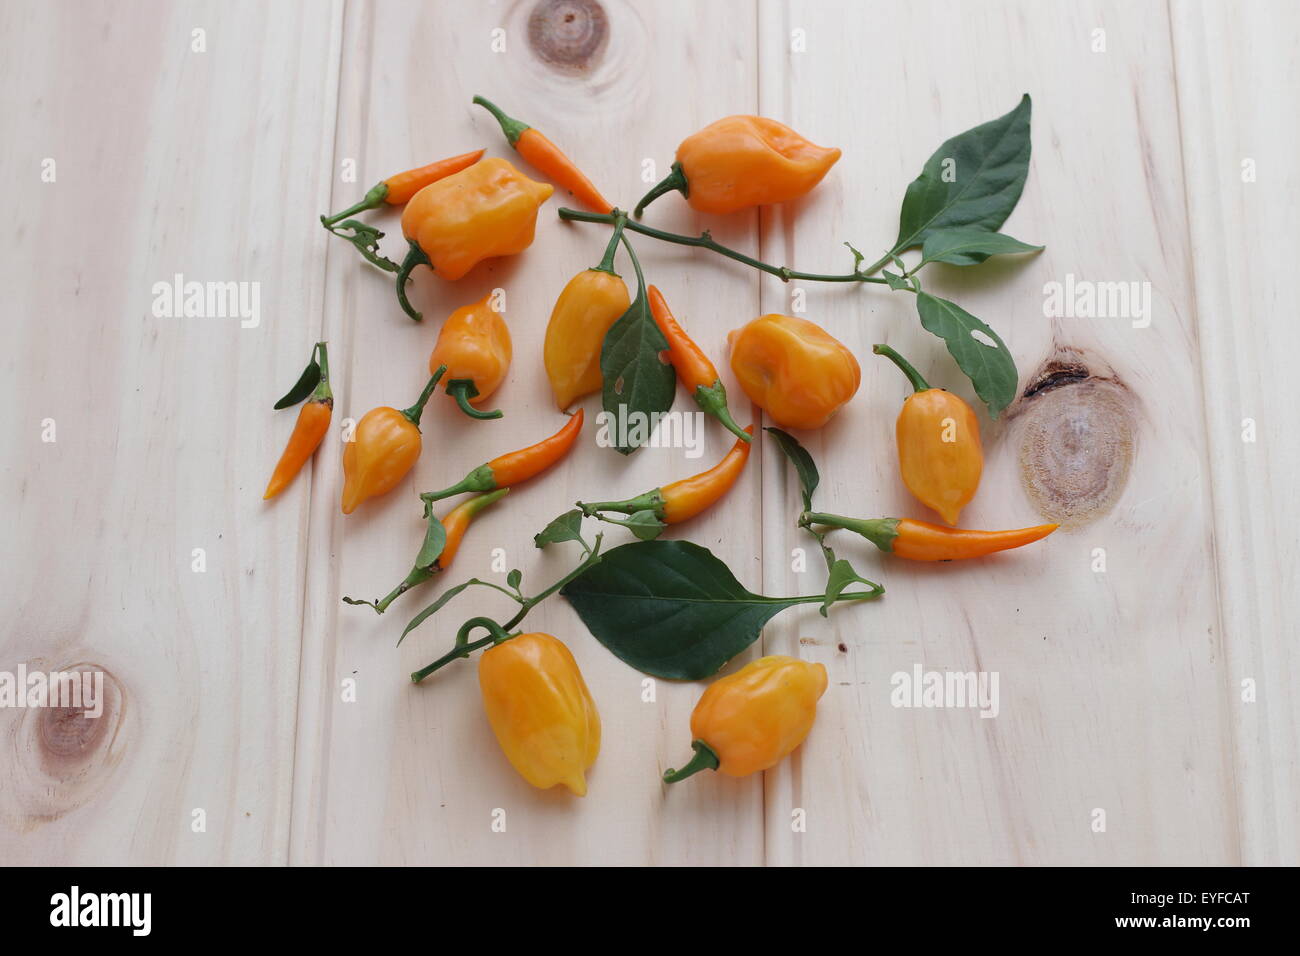 Habanero and Cha Cha chillies on a wooden board Stock Photo